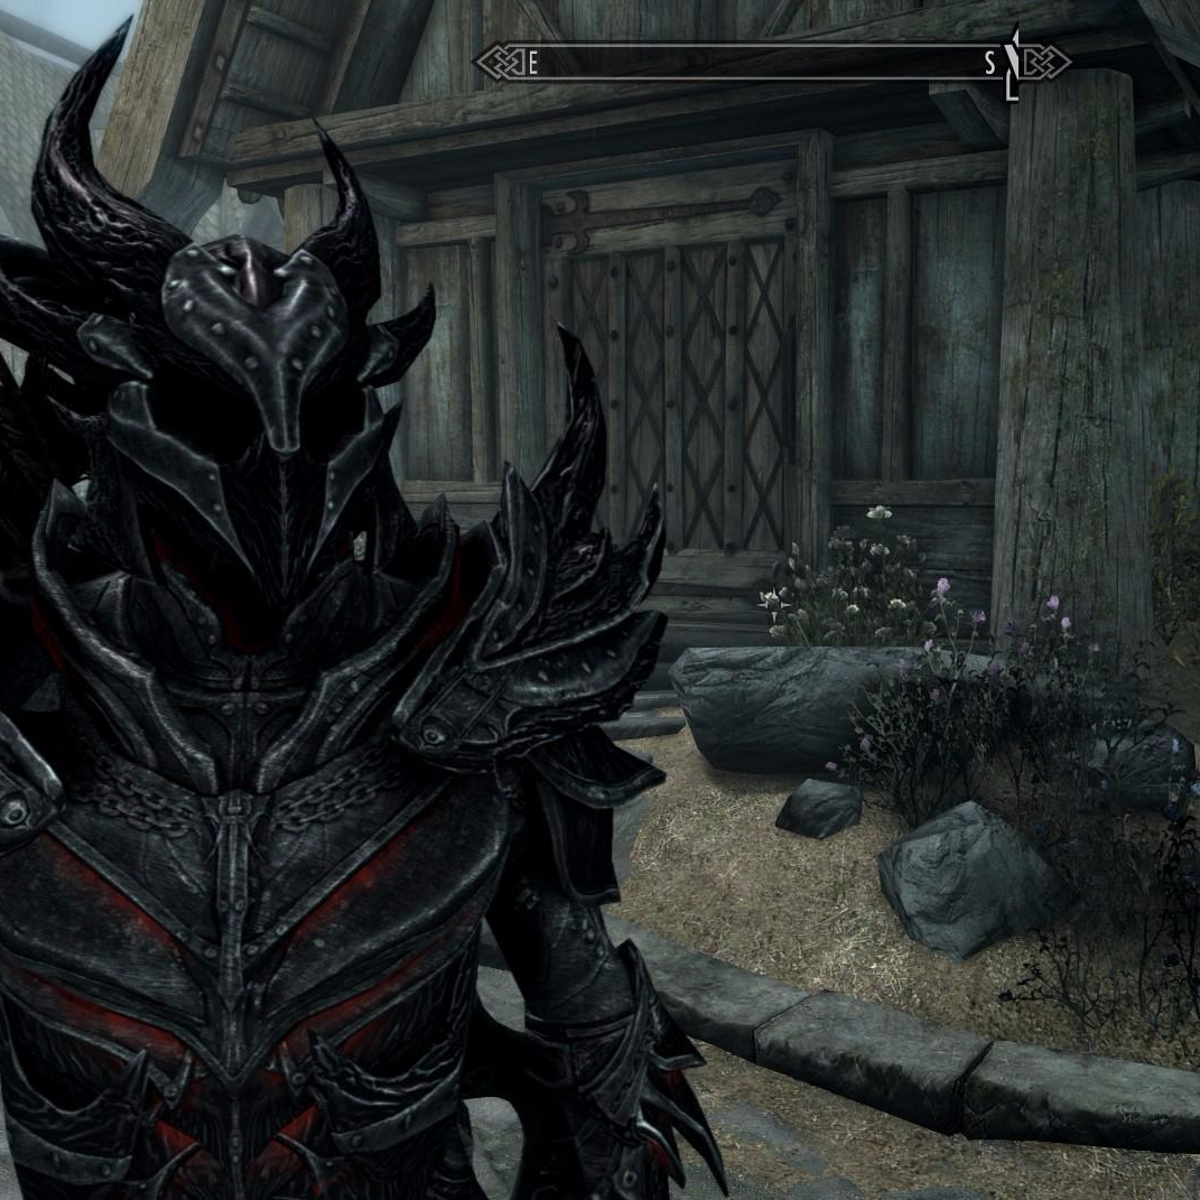 https://assetsio.gnwcdn.com/skyrim-best-armor-ranked-the-highest-defense-heavy-armor-light-armor-shields-and-their-locations-1478194574143.jpg?width=1200&height=1200&fit=crop&quality=100&format=png&enable=upscale&auto=webp